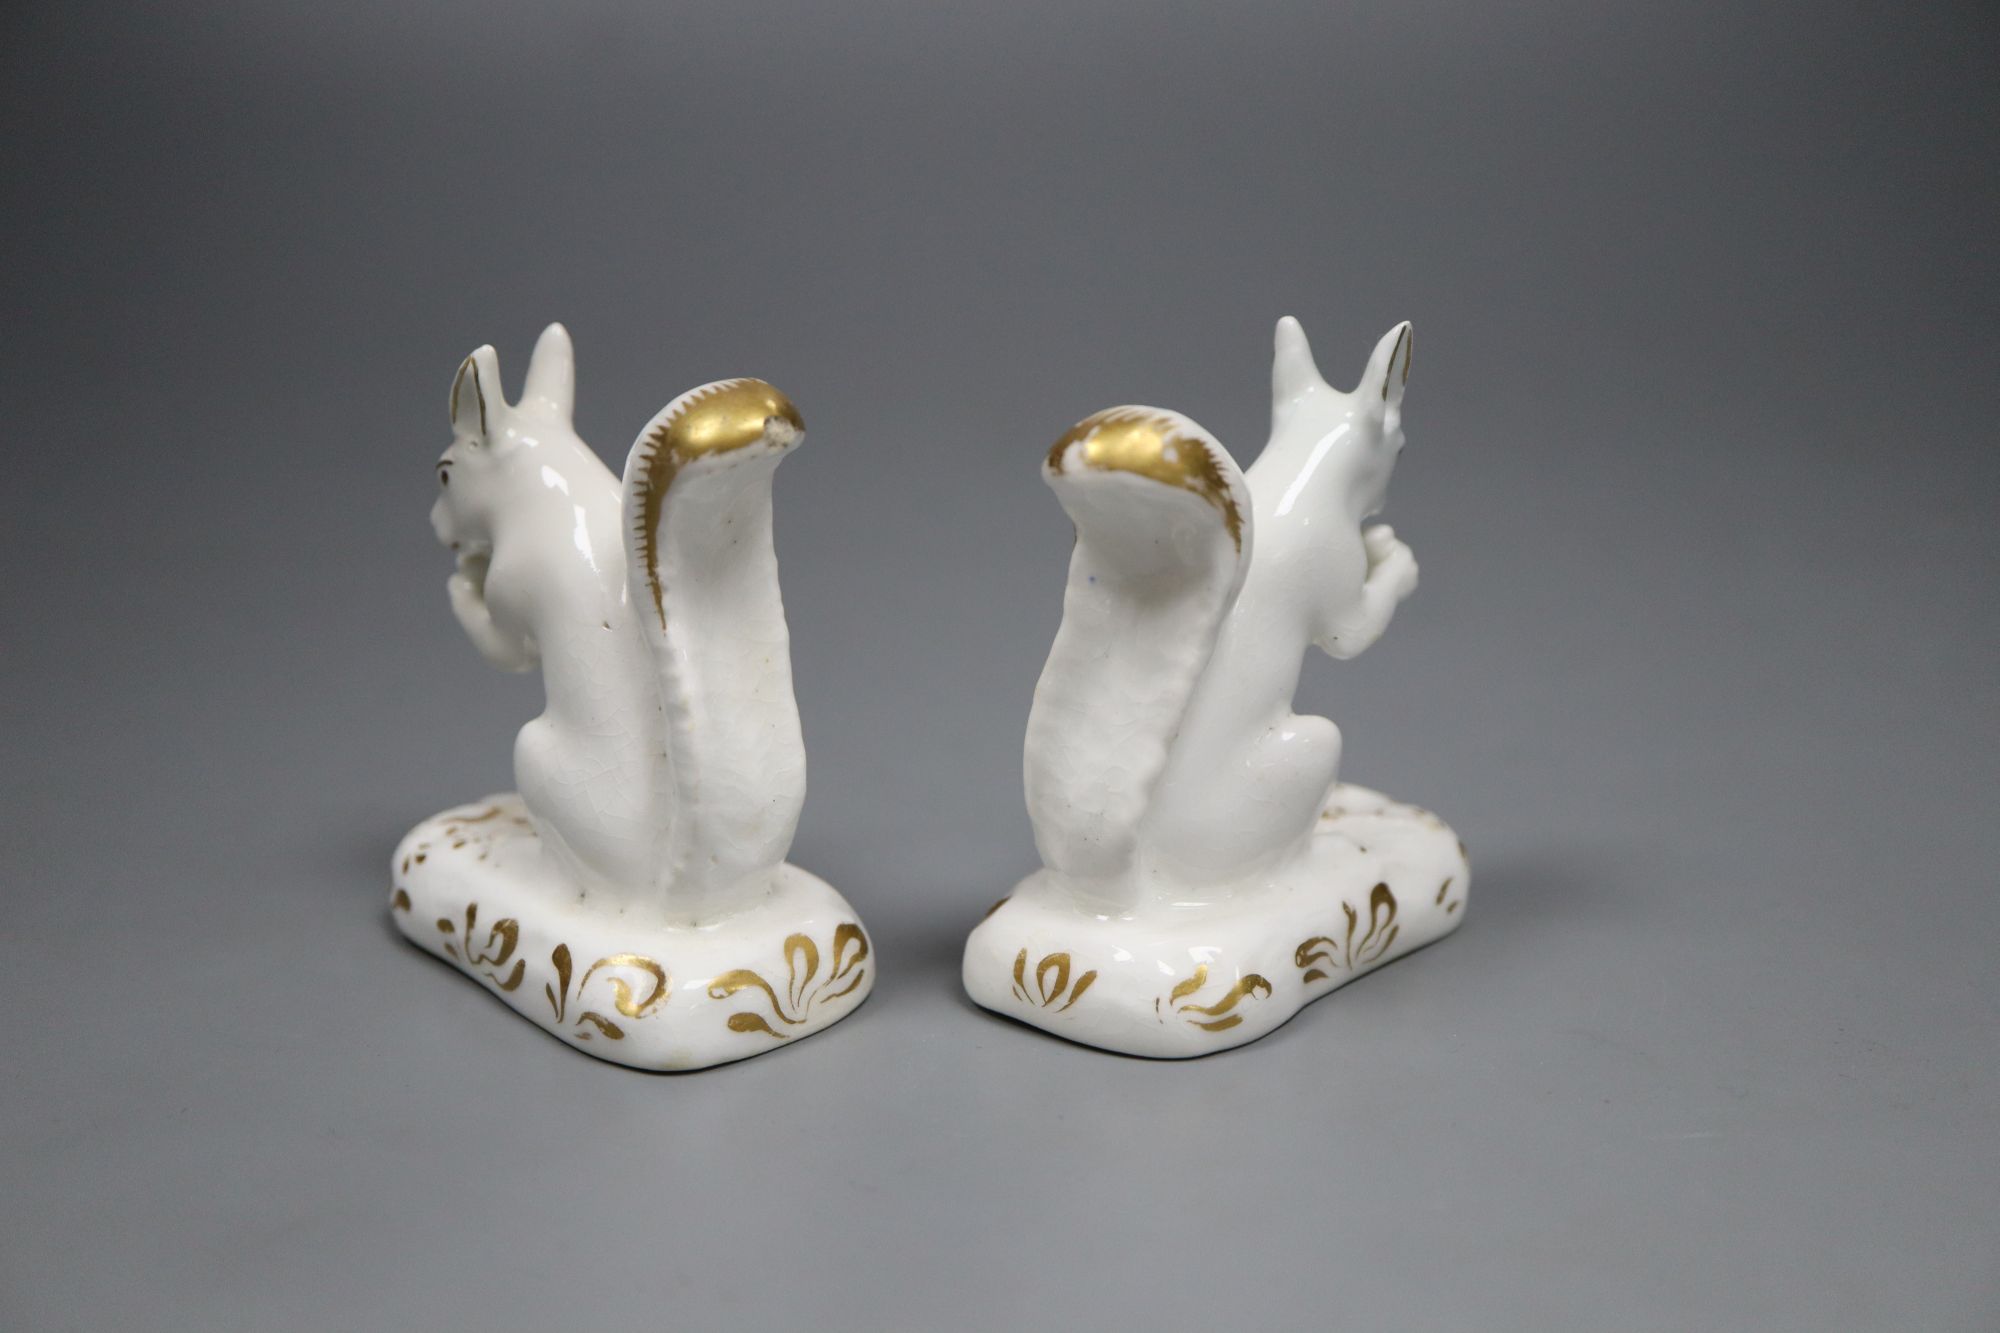 A pair of Grainger, Lee & Co. gilt and white porcelain figures of squirrels, c.1820-37, 6.5cm high